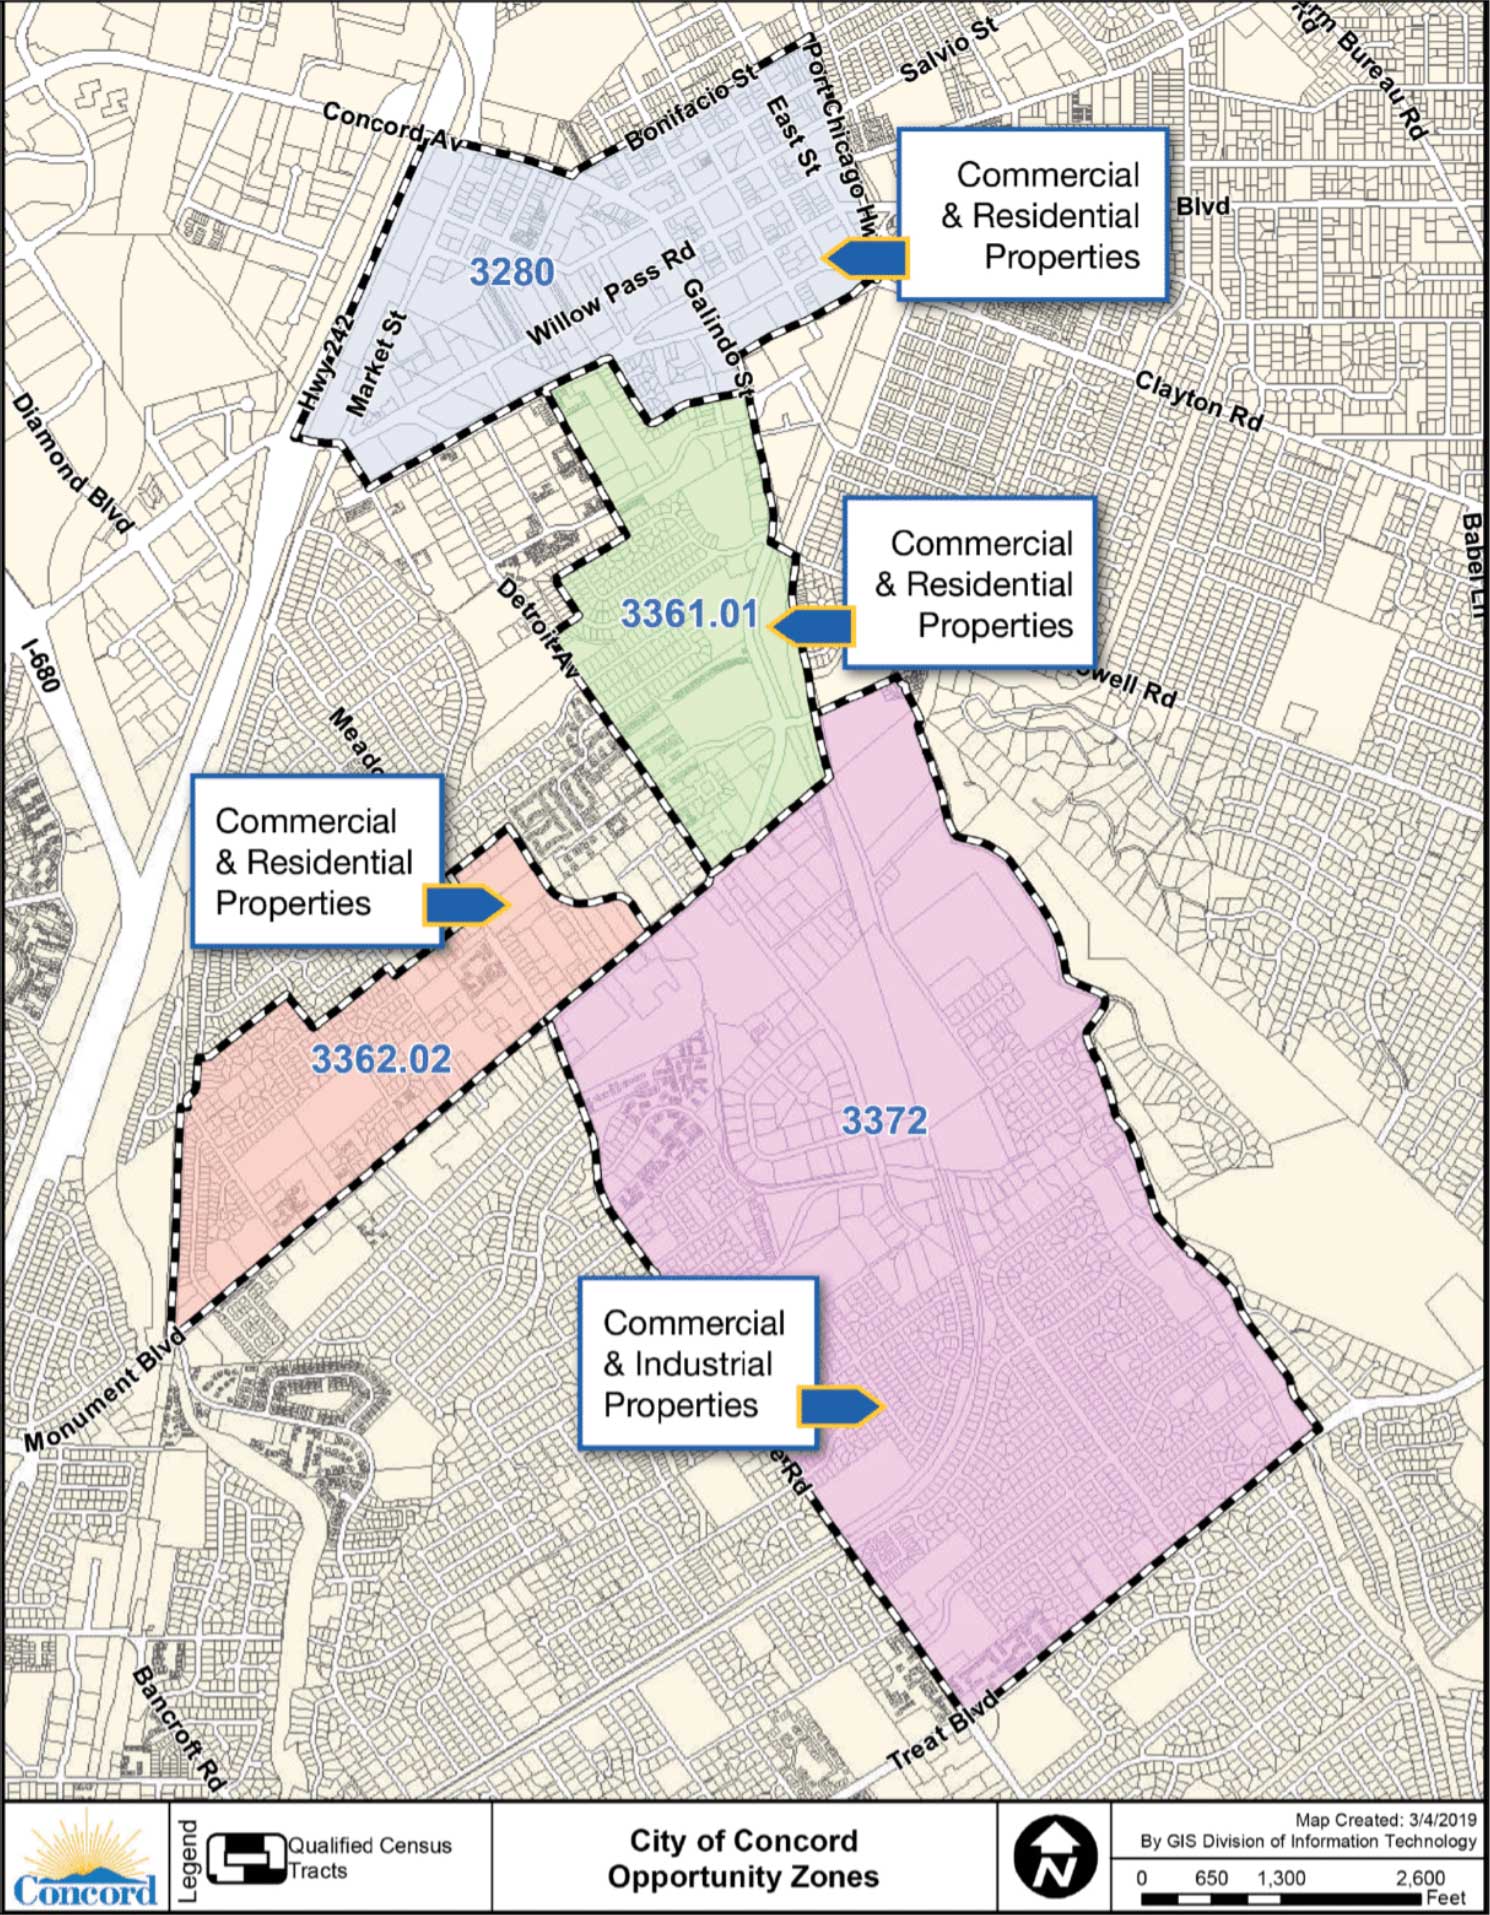 Concord opportunity zones map